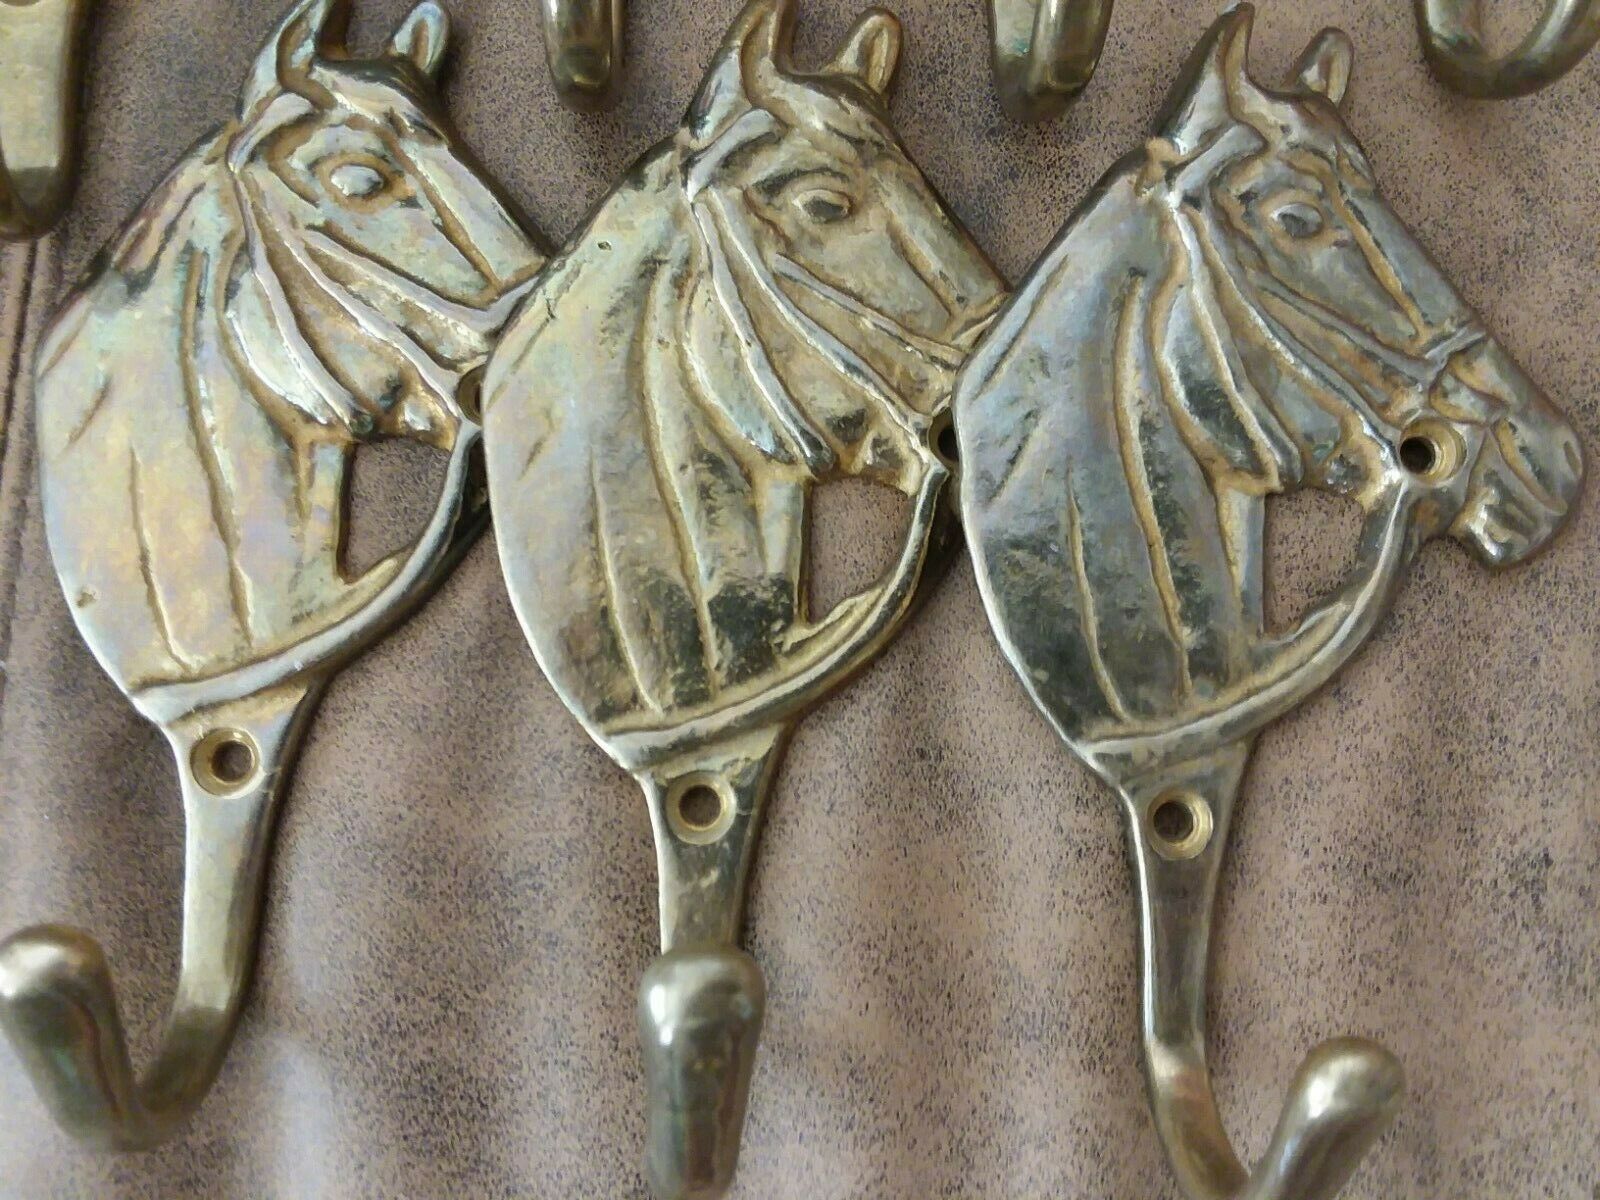 8 Imported Horse 5 1/2" X 3" - Heavy Tack Bridle Holder - Brass